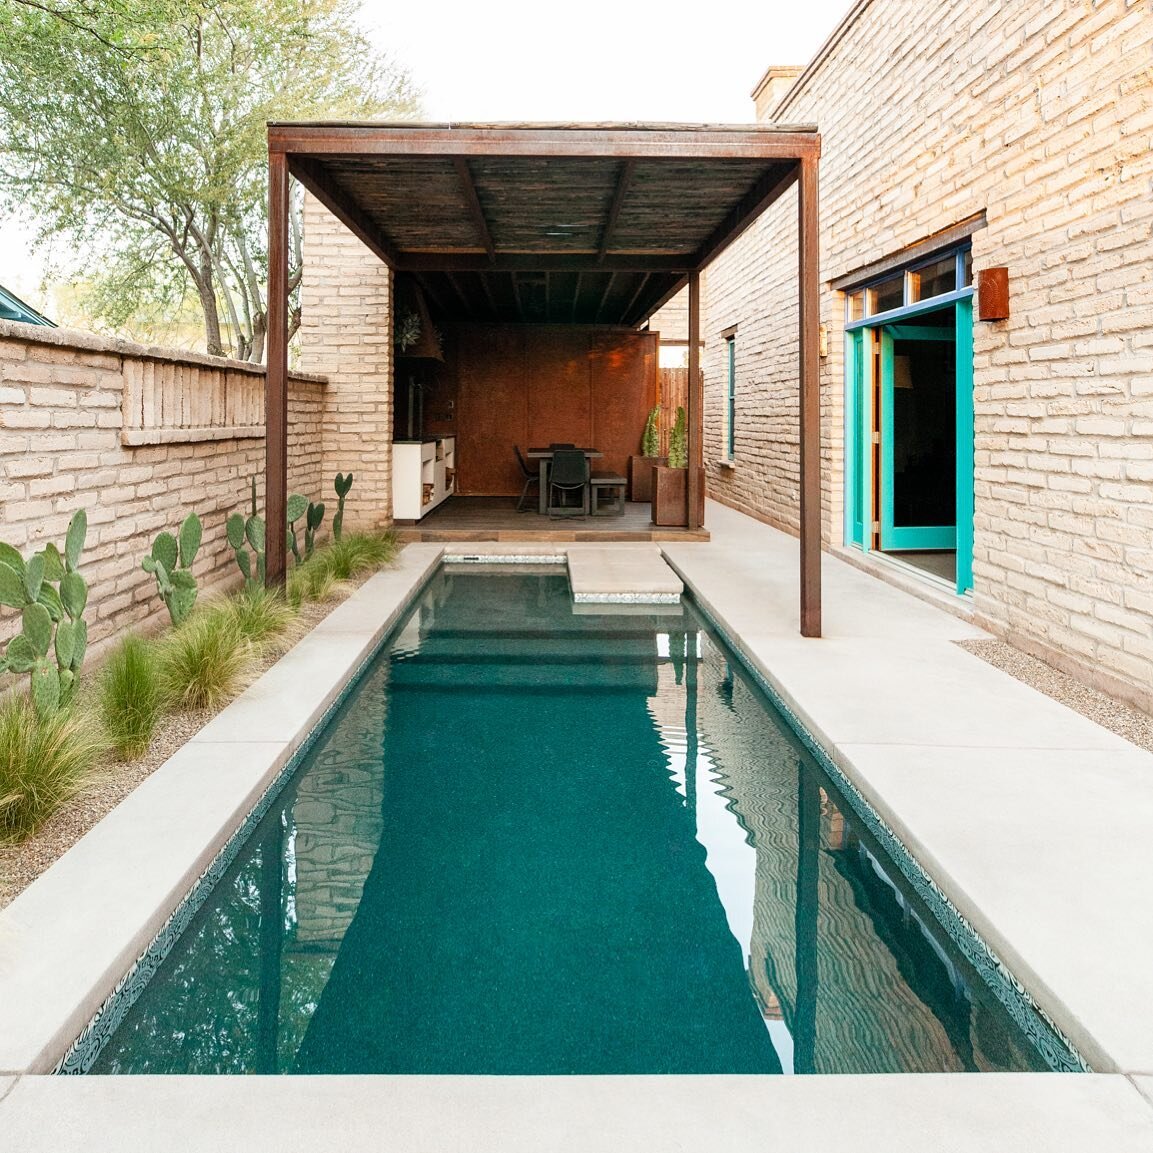 #pooltime in #barriohistorico 
this pool water color is just 🤩 right?? We were going for a coordination with the house door color&hellip;.in a beautiful and subtle way. 
Photo : @fletcherandco 
Pool &amp; Hardscape construction : @azuregallerytucson